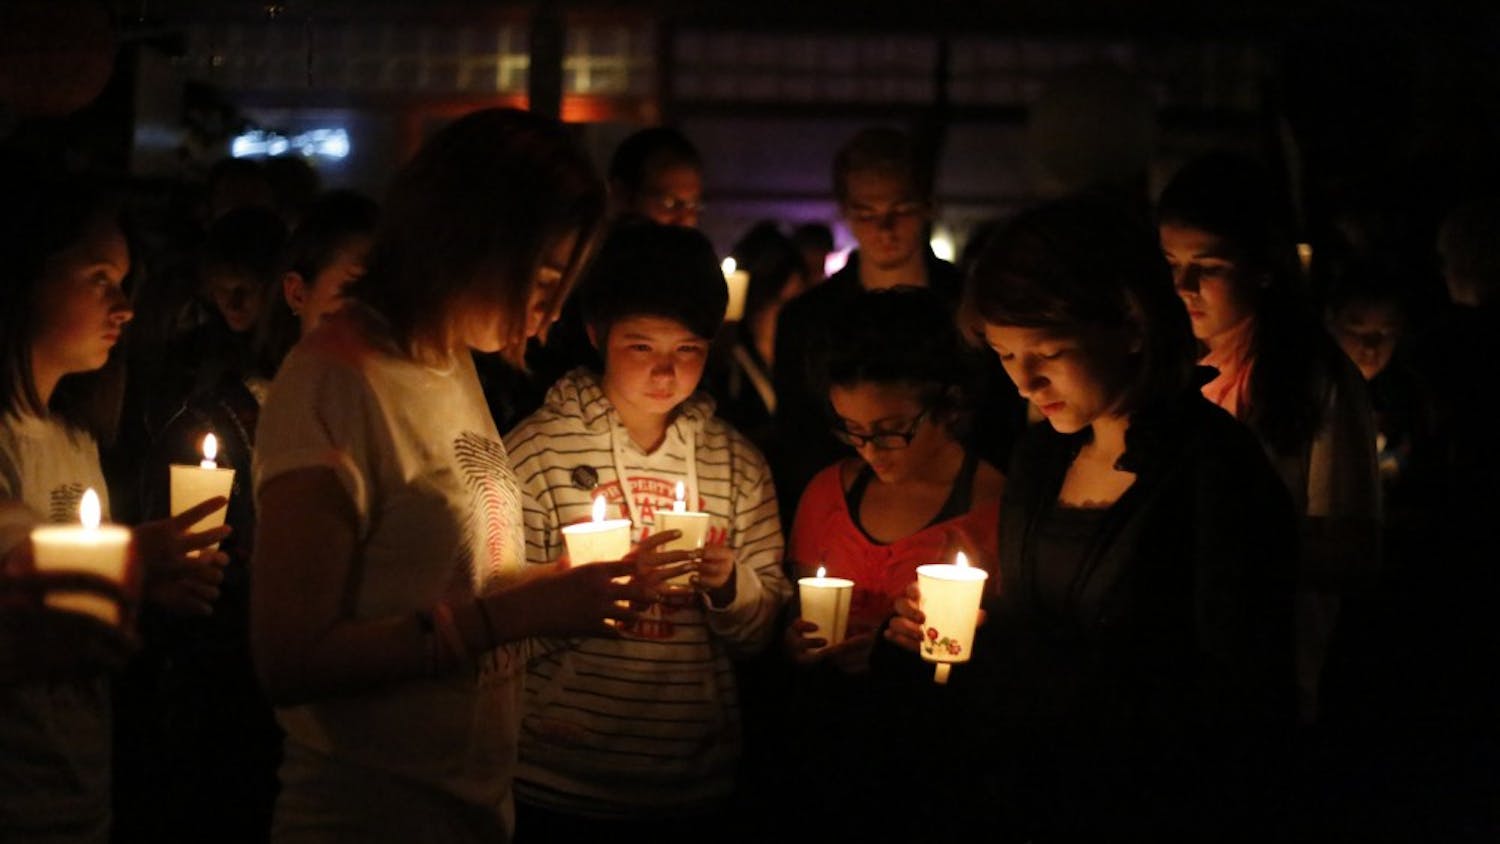 Members of the Prism Youth Community share a moment of silence by candlelight thrusday during the vigil held in memory of transgender teen, Leelah Alcorn, at Rachel's Cafe